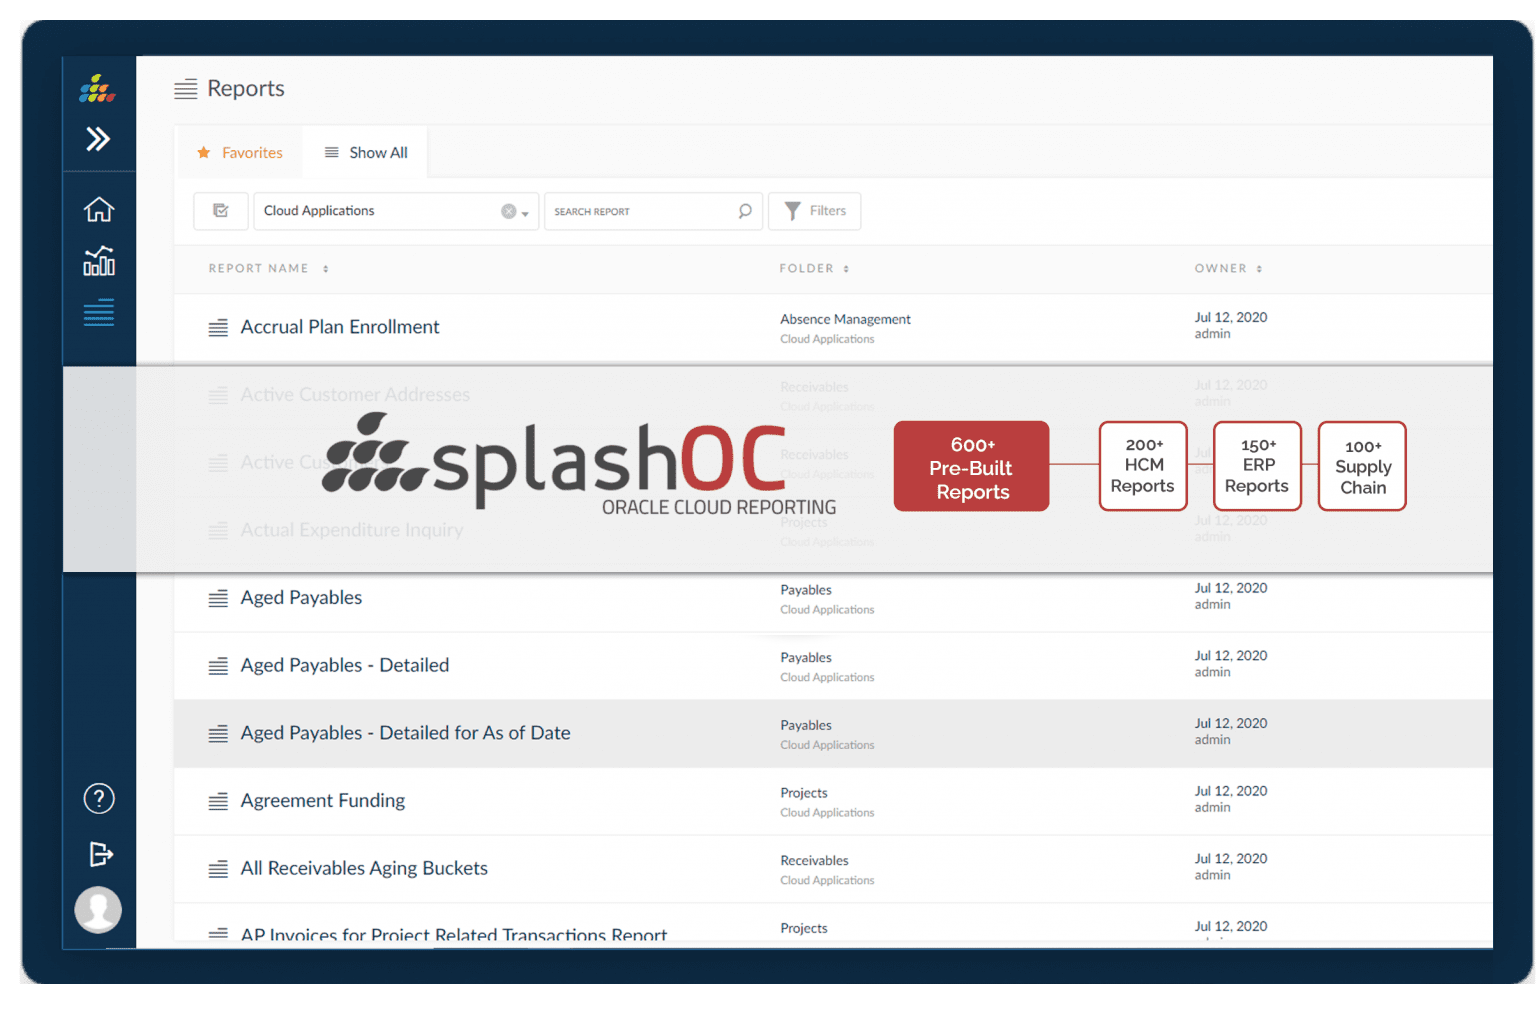 SplashBI's SplashOC is an ad-hoc reporting and analytics solution for Oracle Fusion Cloud Applications.